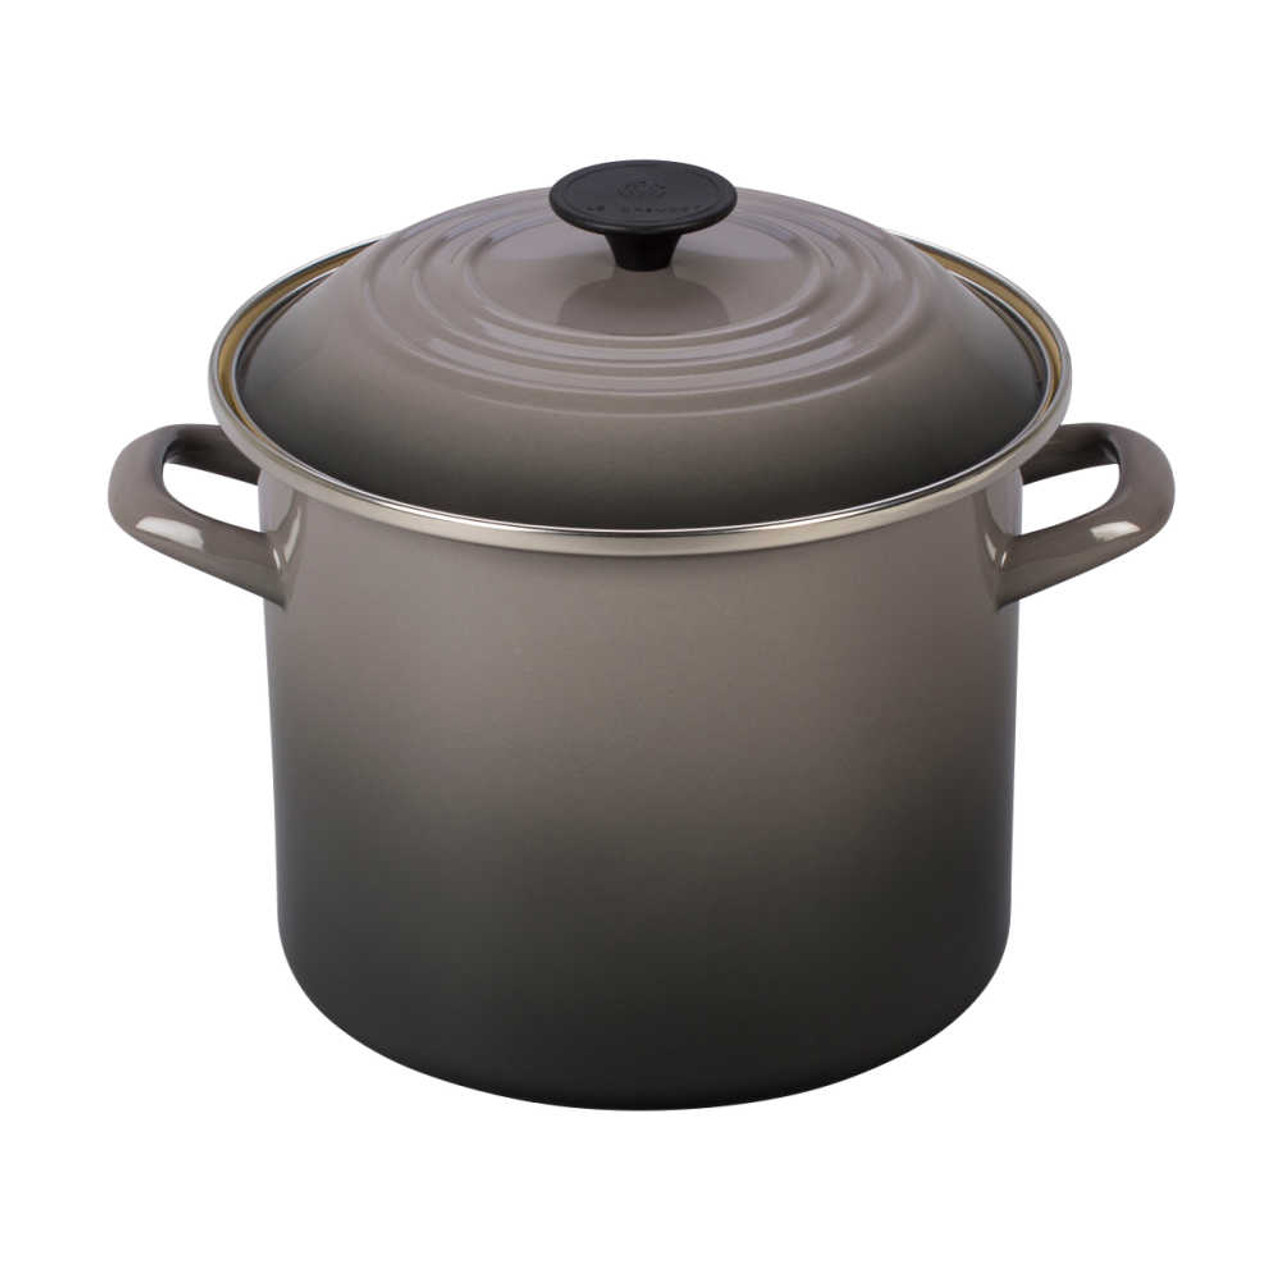 https://cdn11.bigcommerce.com/s-hccytny0od/images/stencil/1280x1280/products/1817/17592/Le_Creuset_Stockpot_Oyster__55547.1639778021.jpg?c=2?imbypass=on